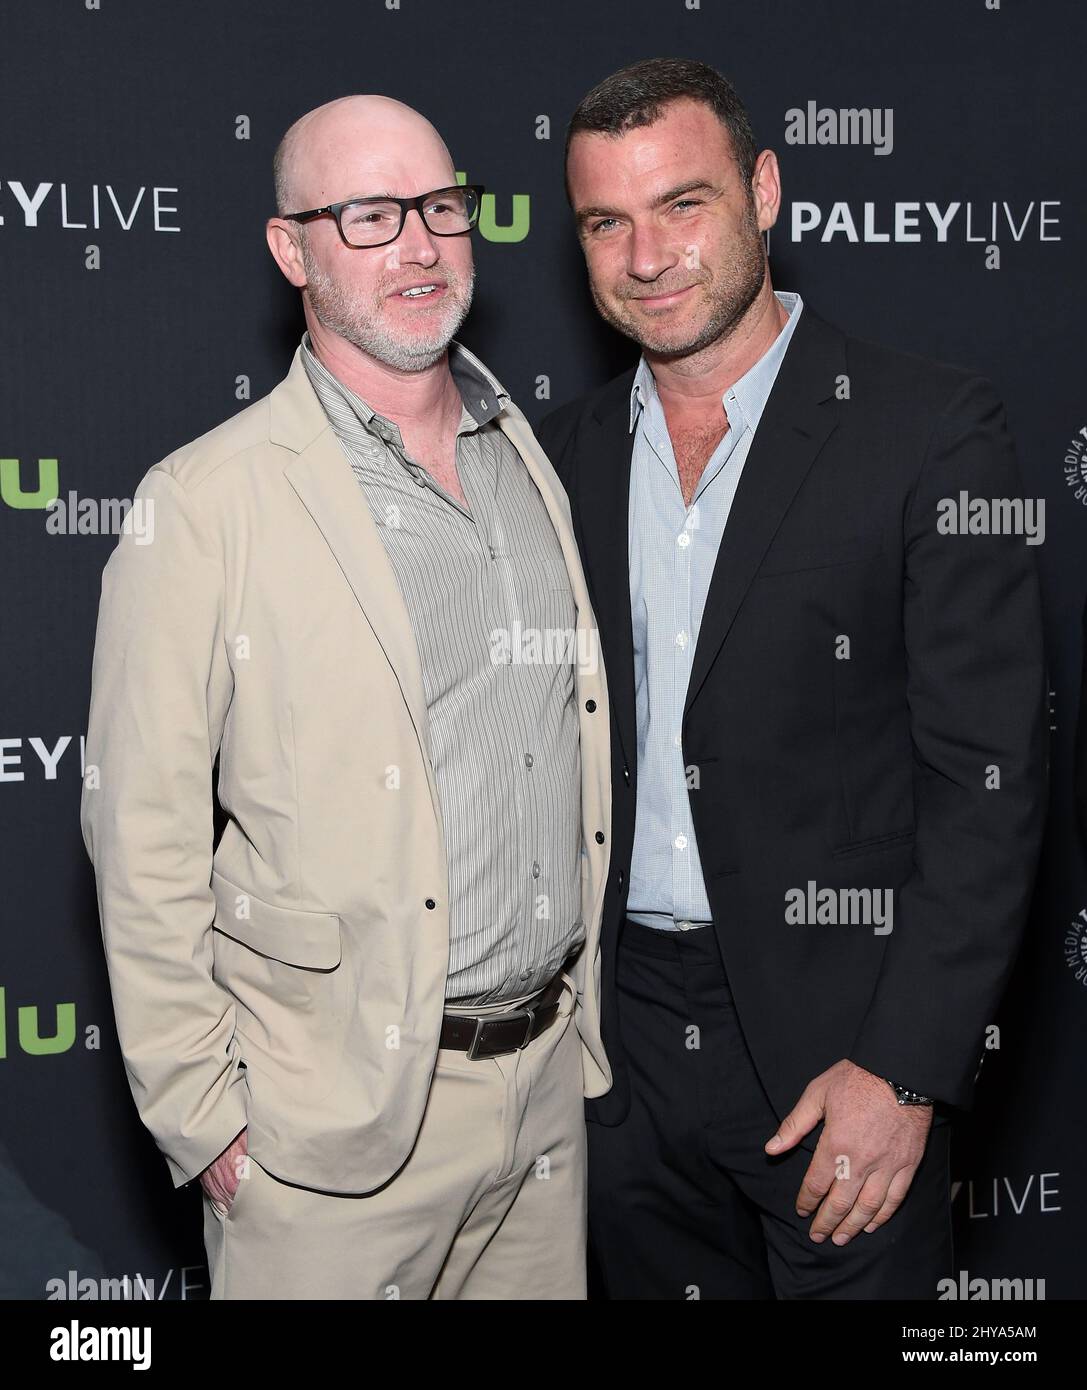 David Hollander & Liev Schreiber attending PaleyLive LA: An Evening with Ray Donovan, held at the Paley Center for Media, inBeverly Hills, California. Stock Photo